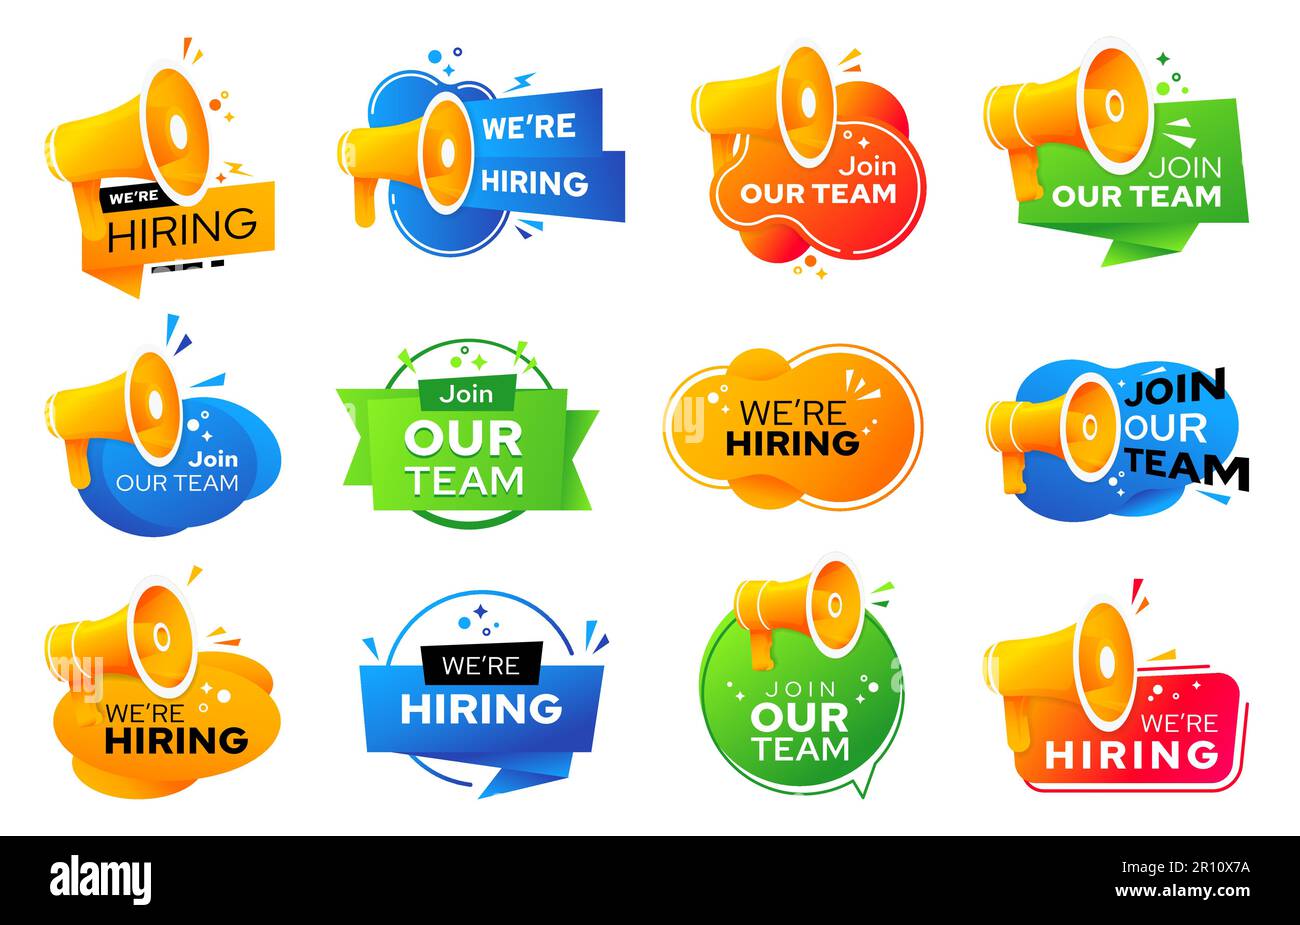 We are hiring, job offer or recruit and join our team, vector megaphone icons We are hiring signs or job vacancy posters and join our team banners for work employment or recruitment announcement Stock Vector